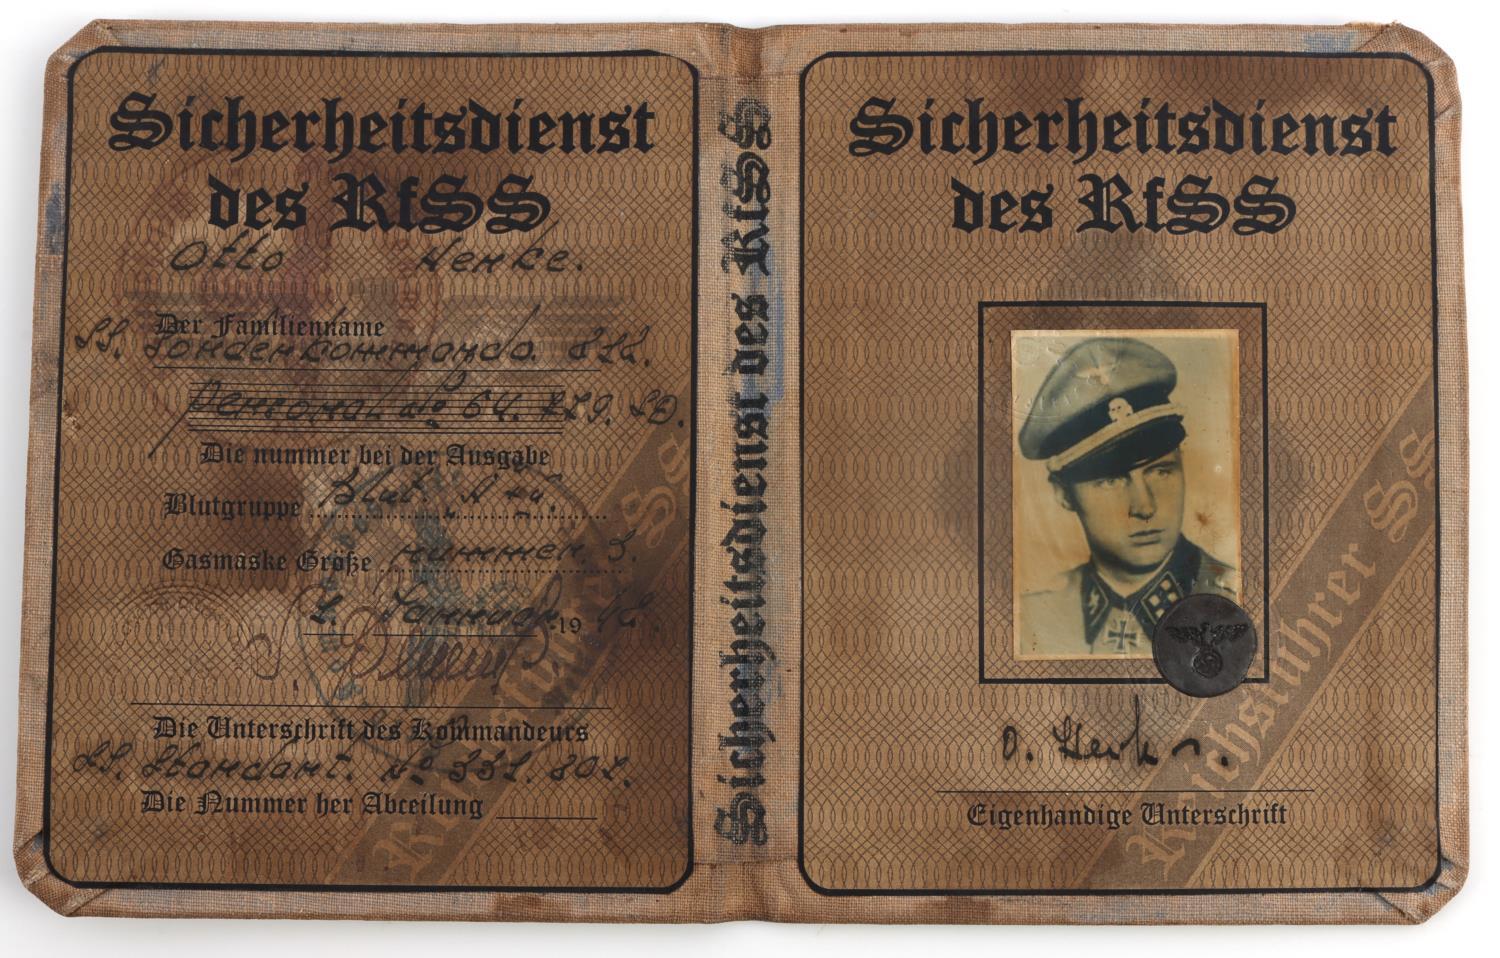 WWII GERMAN THIRD REICH AUSWISES ID BOOK LOT OF 2